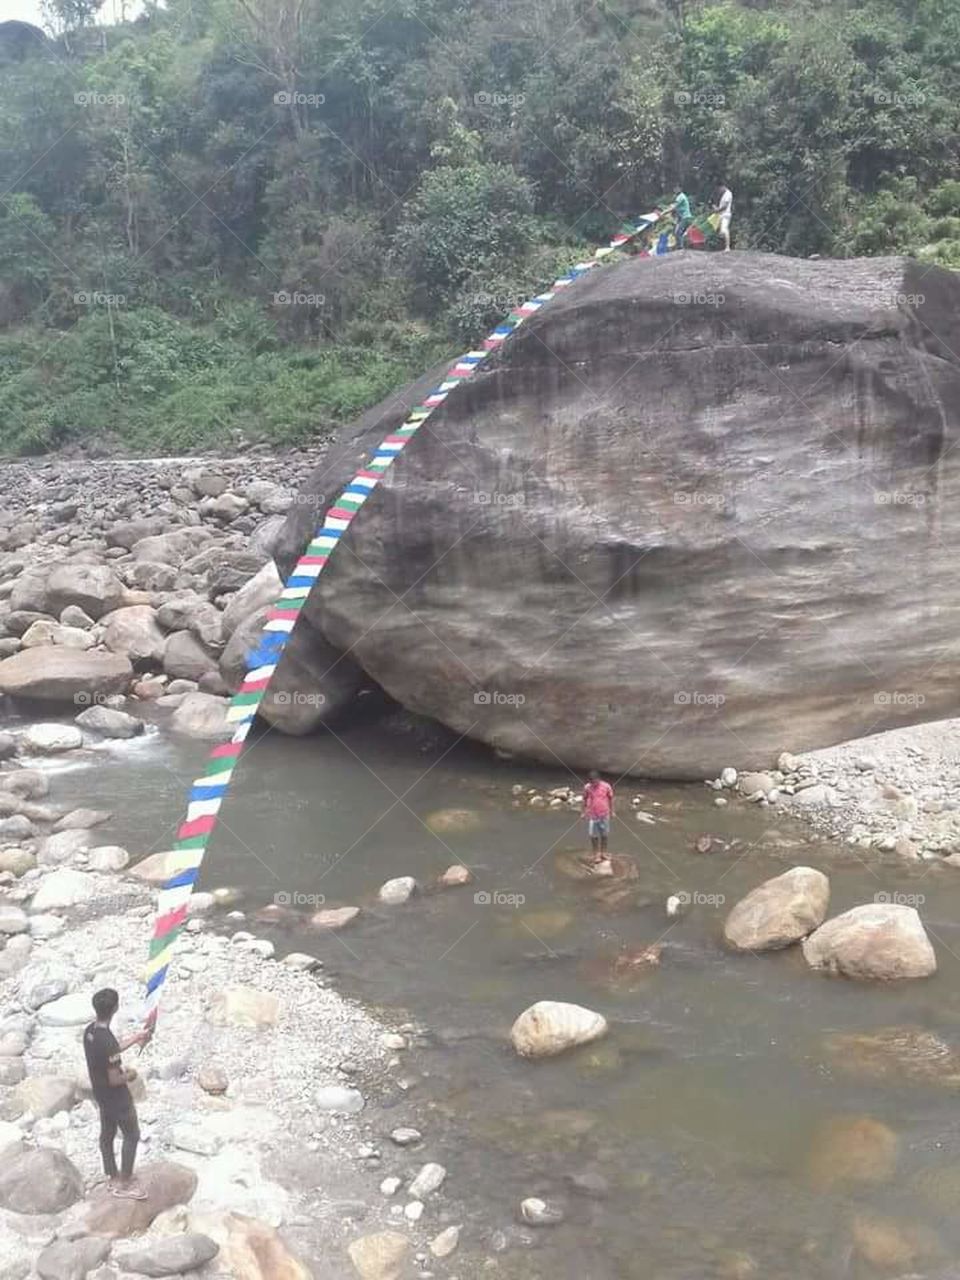 The ritualistic flag connecting the two countries,India and Bhutan. village people supporting cleanindia mission cleaning the river Jaldhaka,which runs in between India and Bhutan.Thus photo is for selling purpise